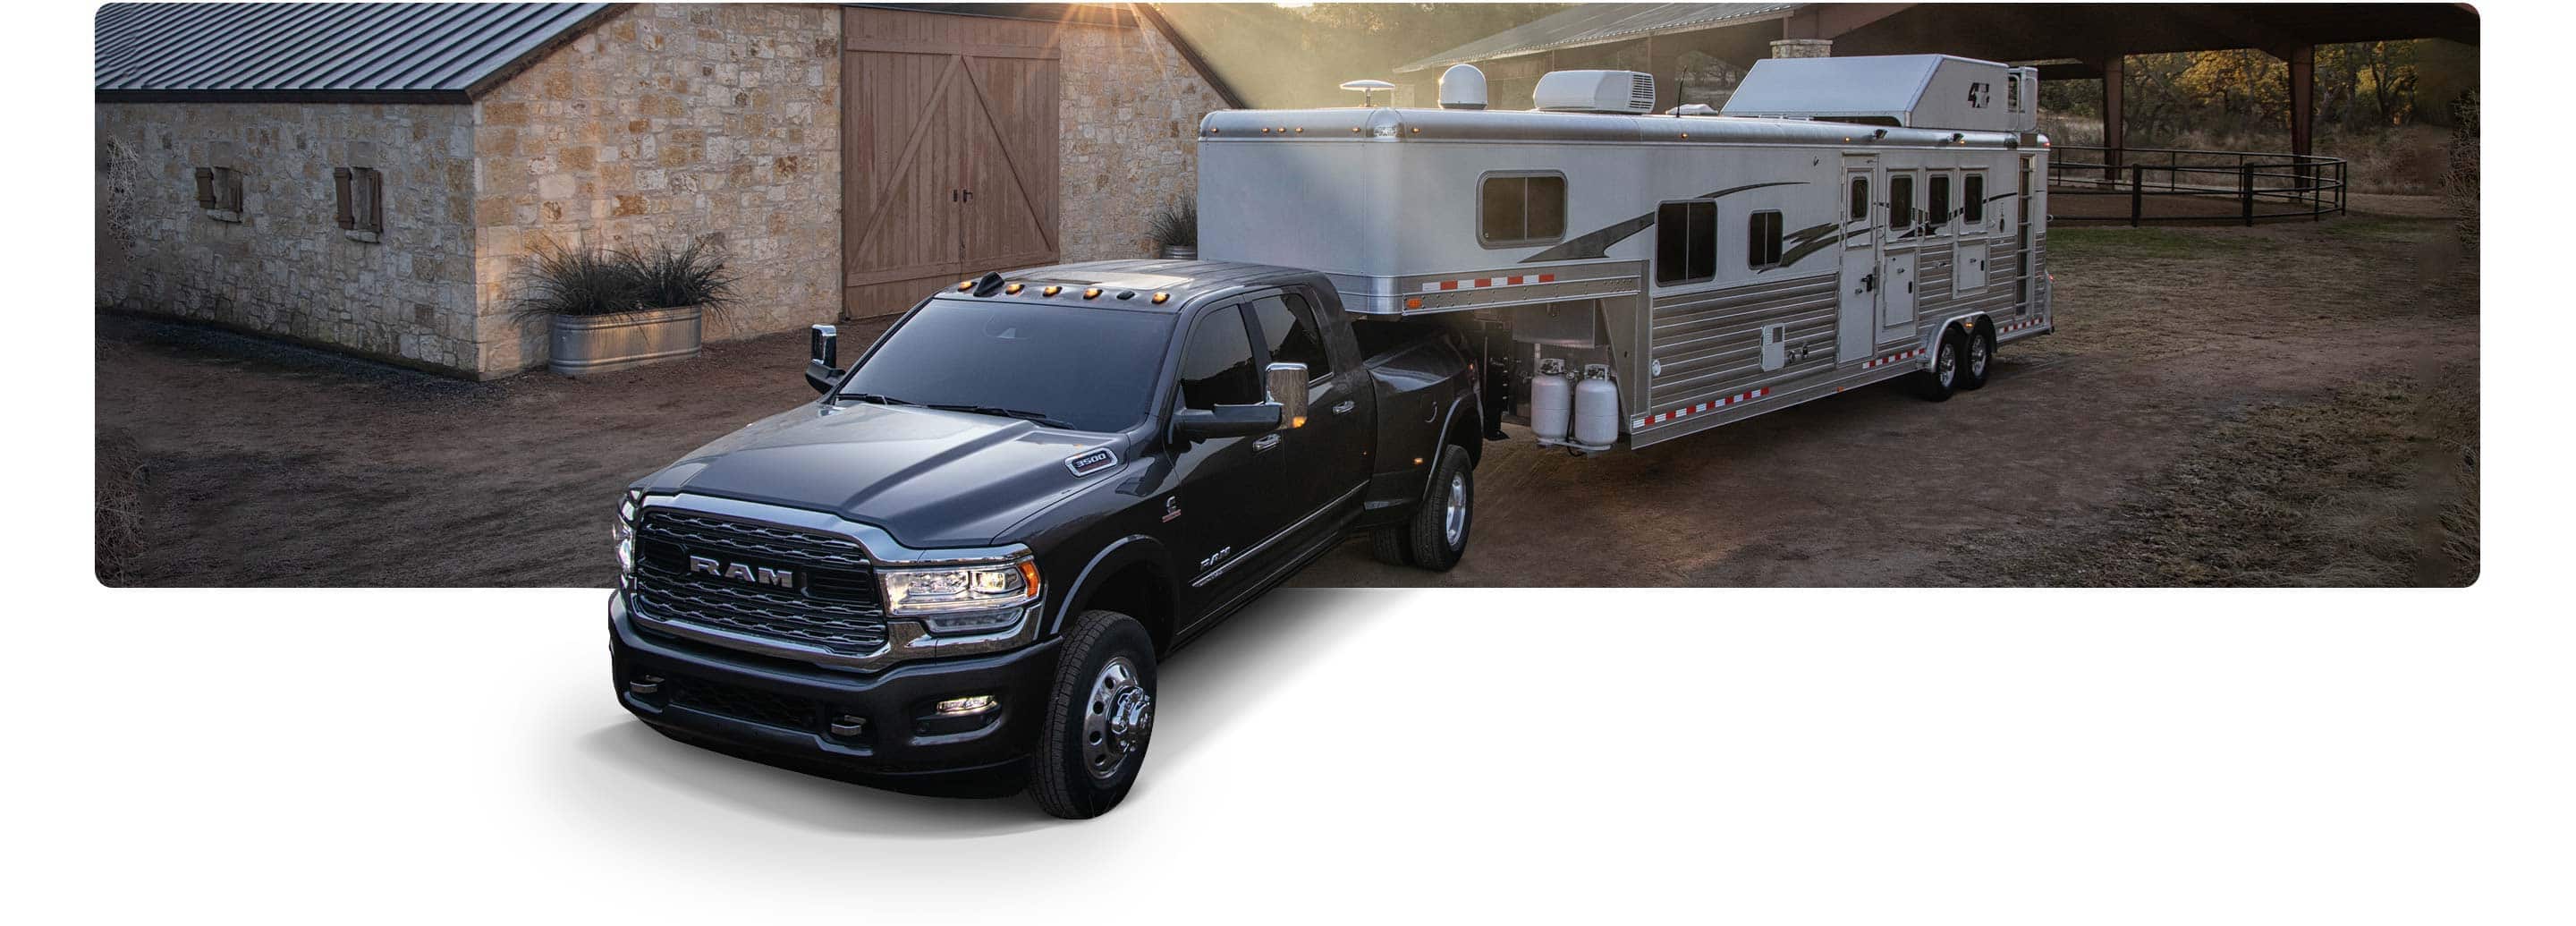 The 2021 Ram 3500 towing a motor home.